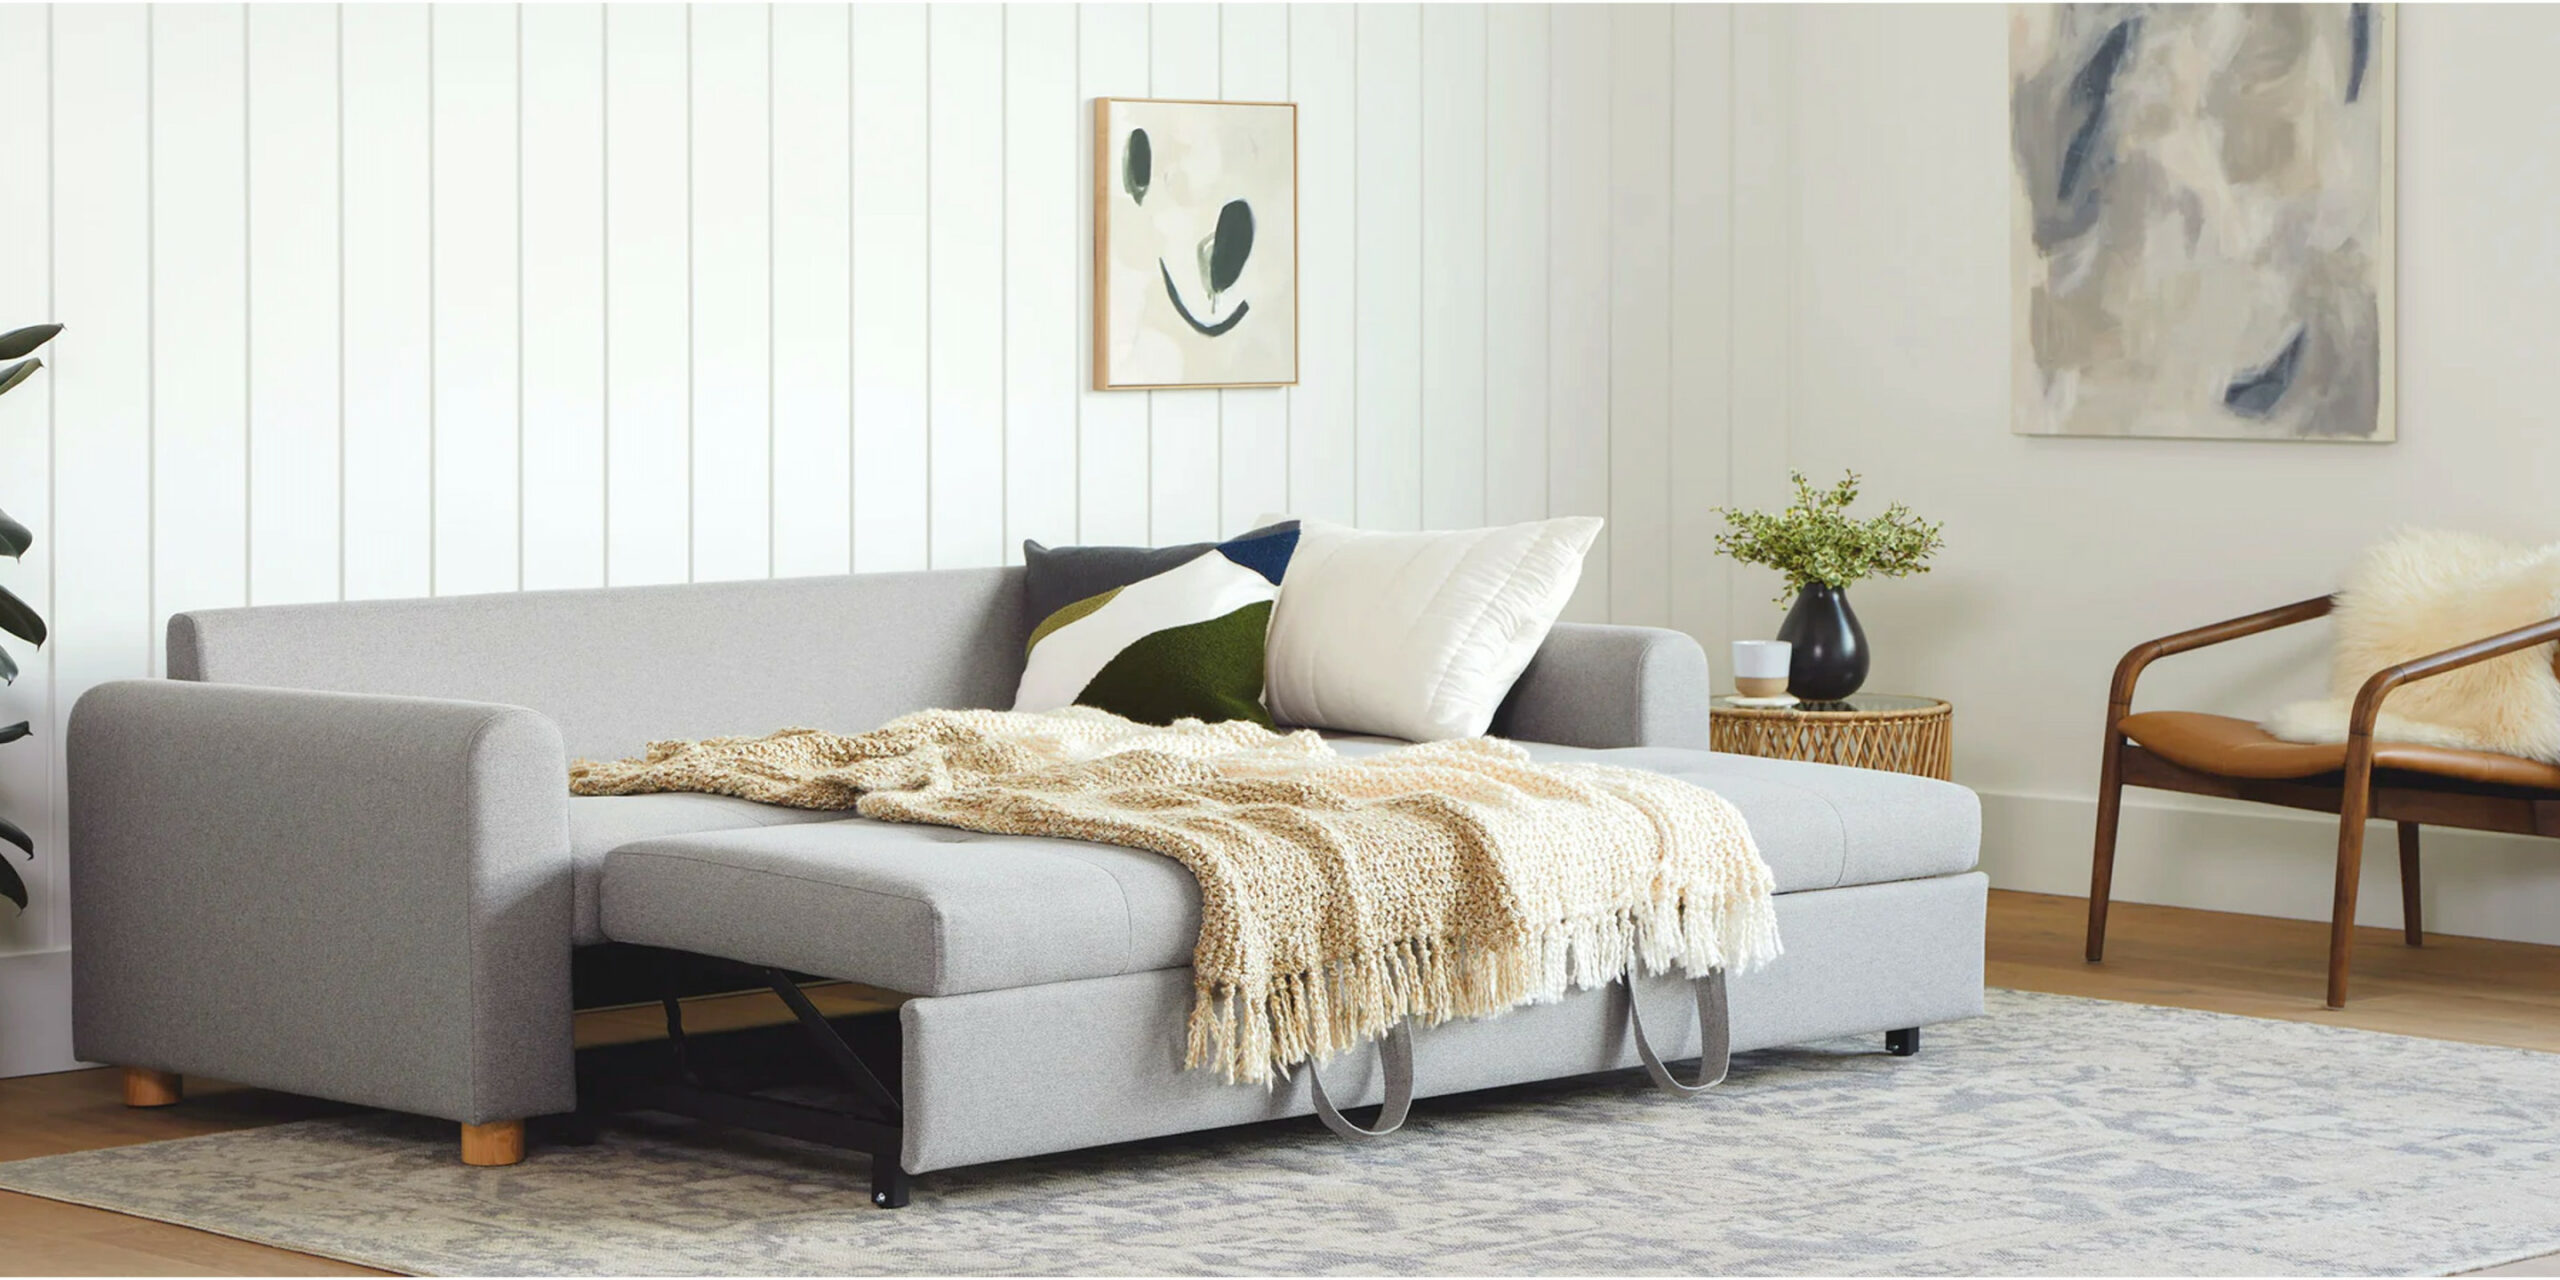 Best sleeper sofas : twin, full, queen, and sectional  Real Homes